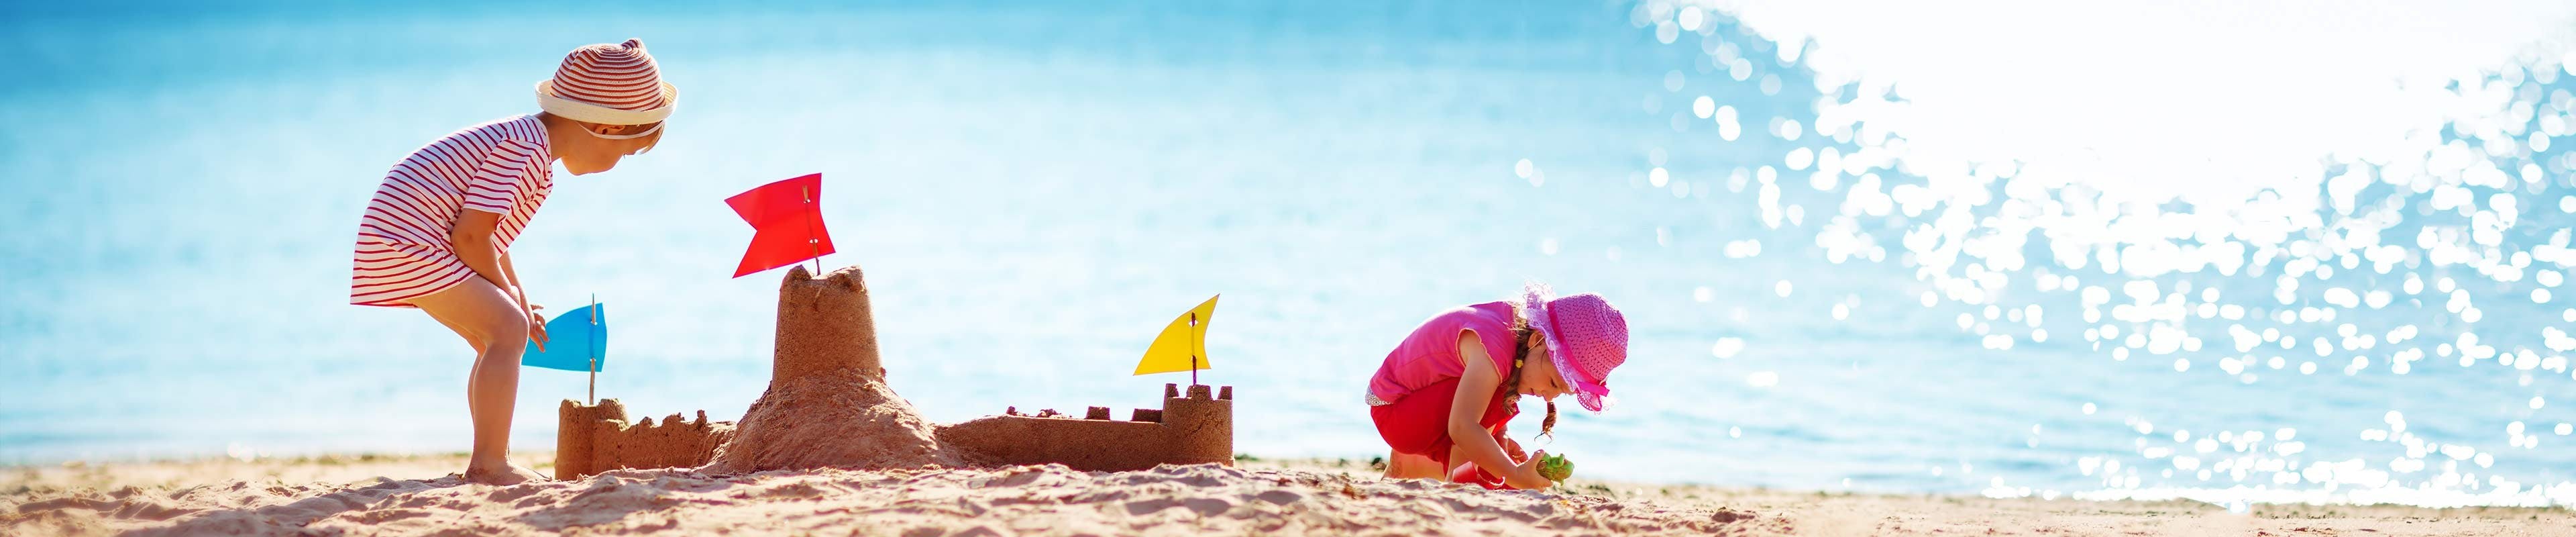 Image of two children playing at the beach on a sunny day.